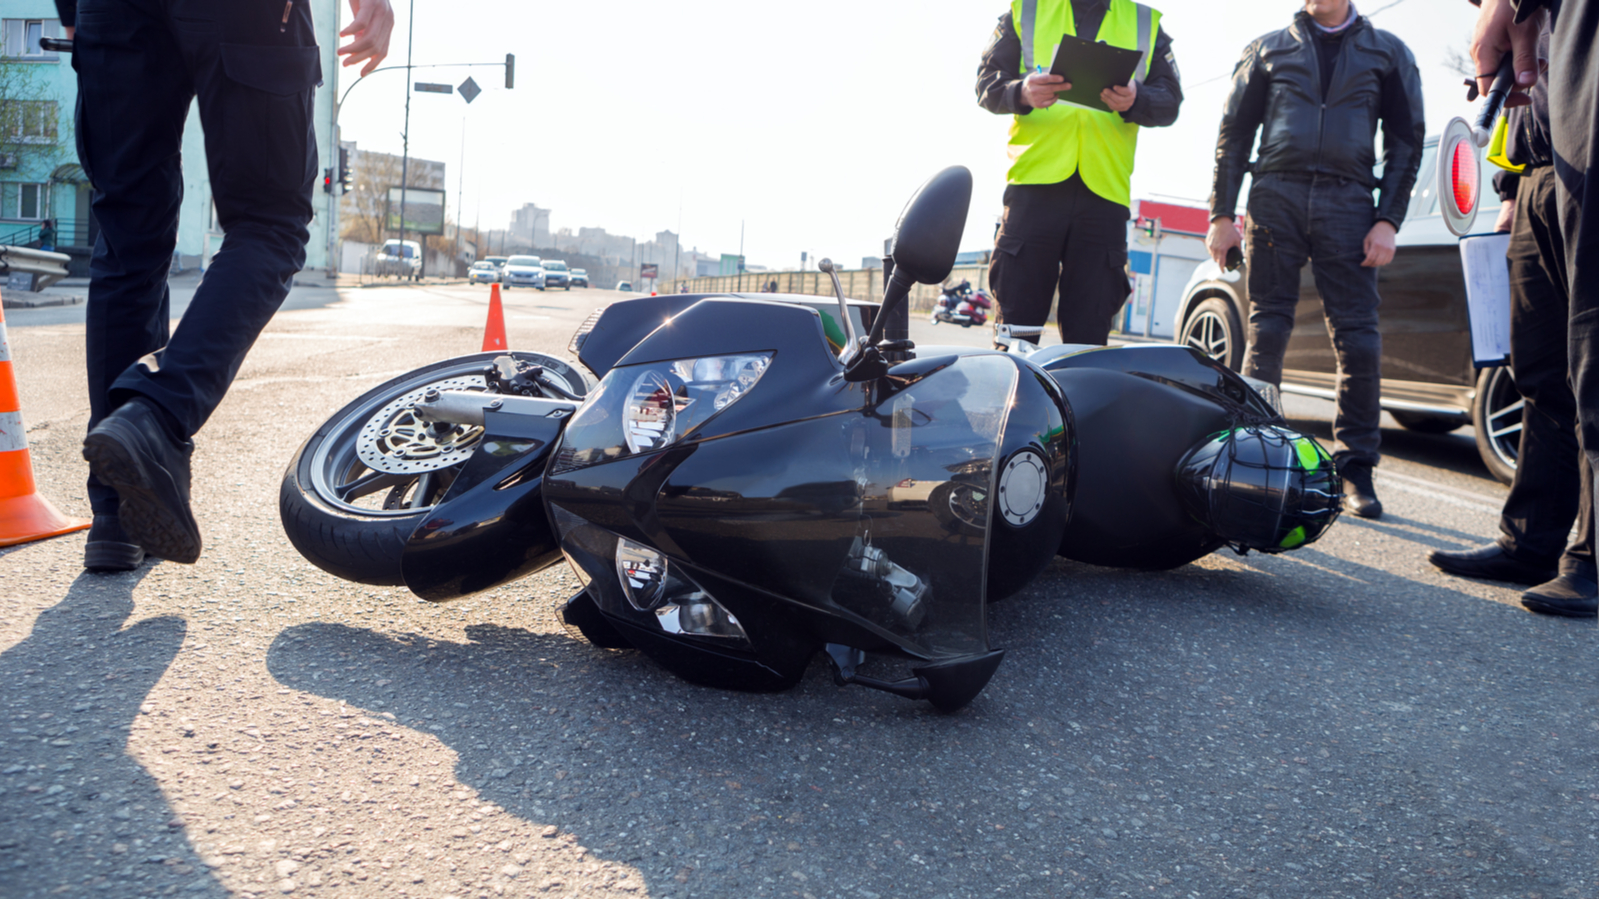 Motorcycle Wreck Lawyers Missouri and Illinois | Motorcycle Accident Lawyer  St. Louis